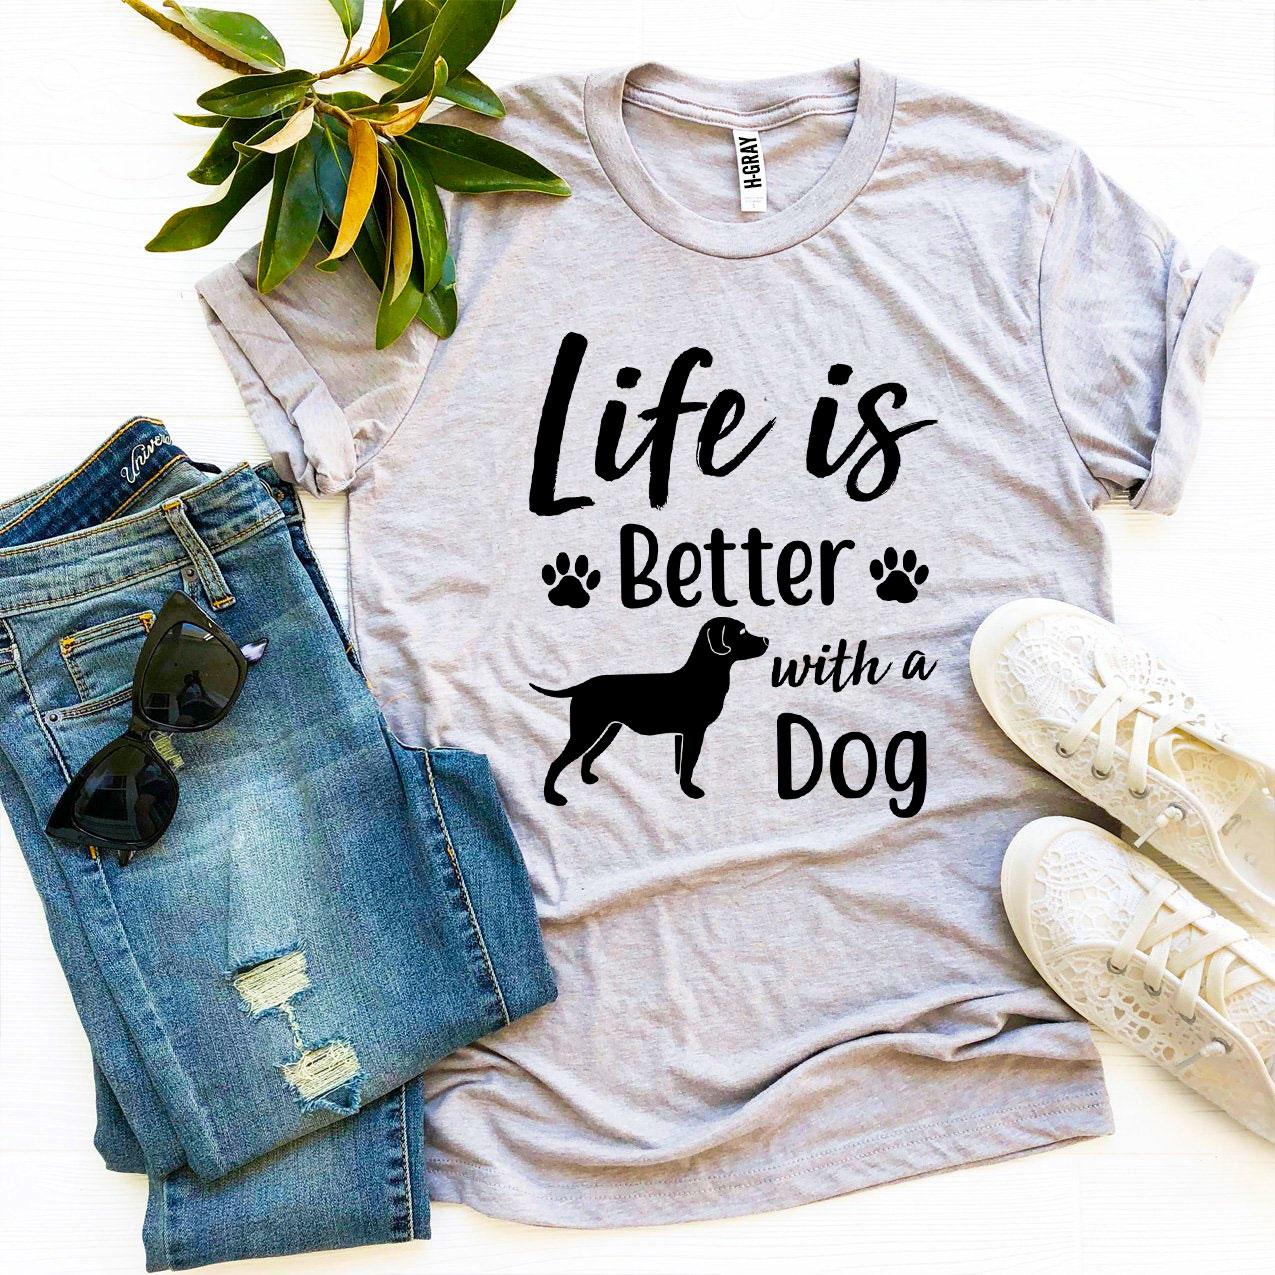 Life Is Better With a Dog T-shirt